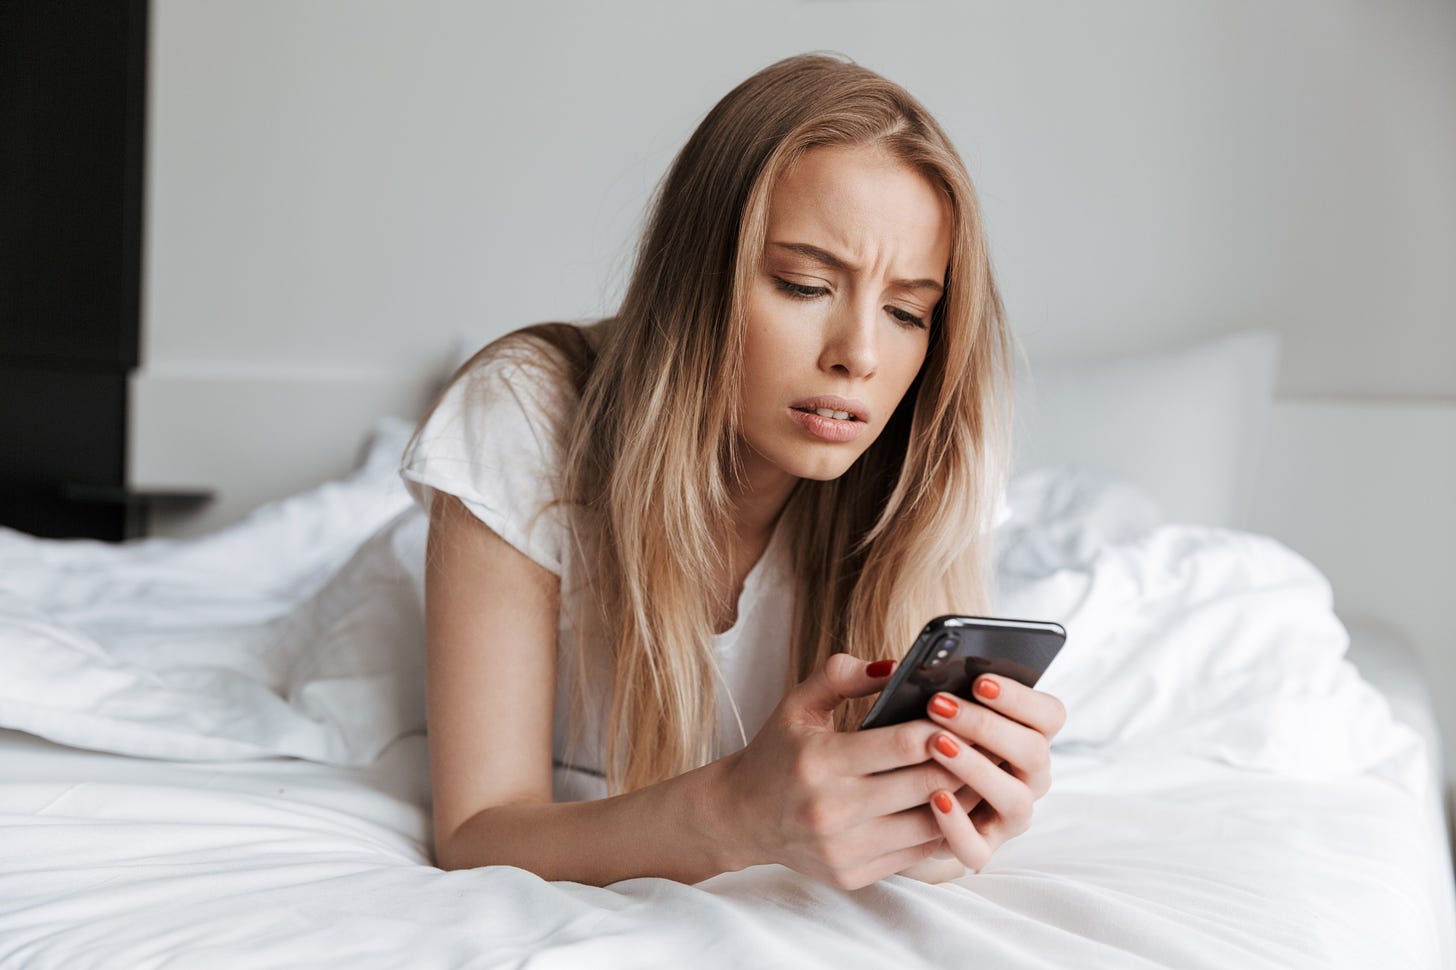 An upset woman stares down at her phone while she lies in bed.